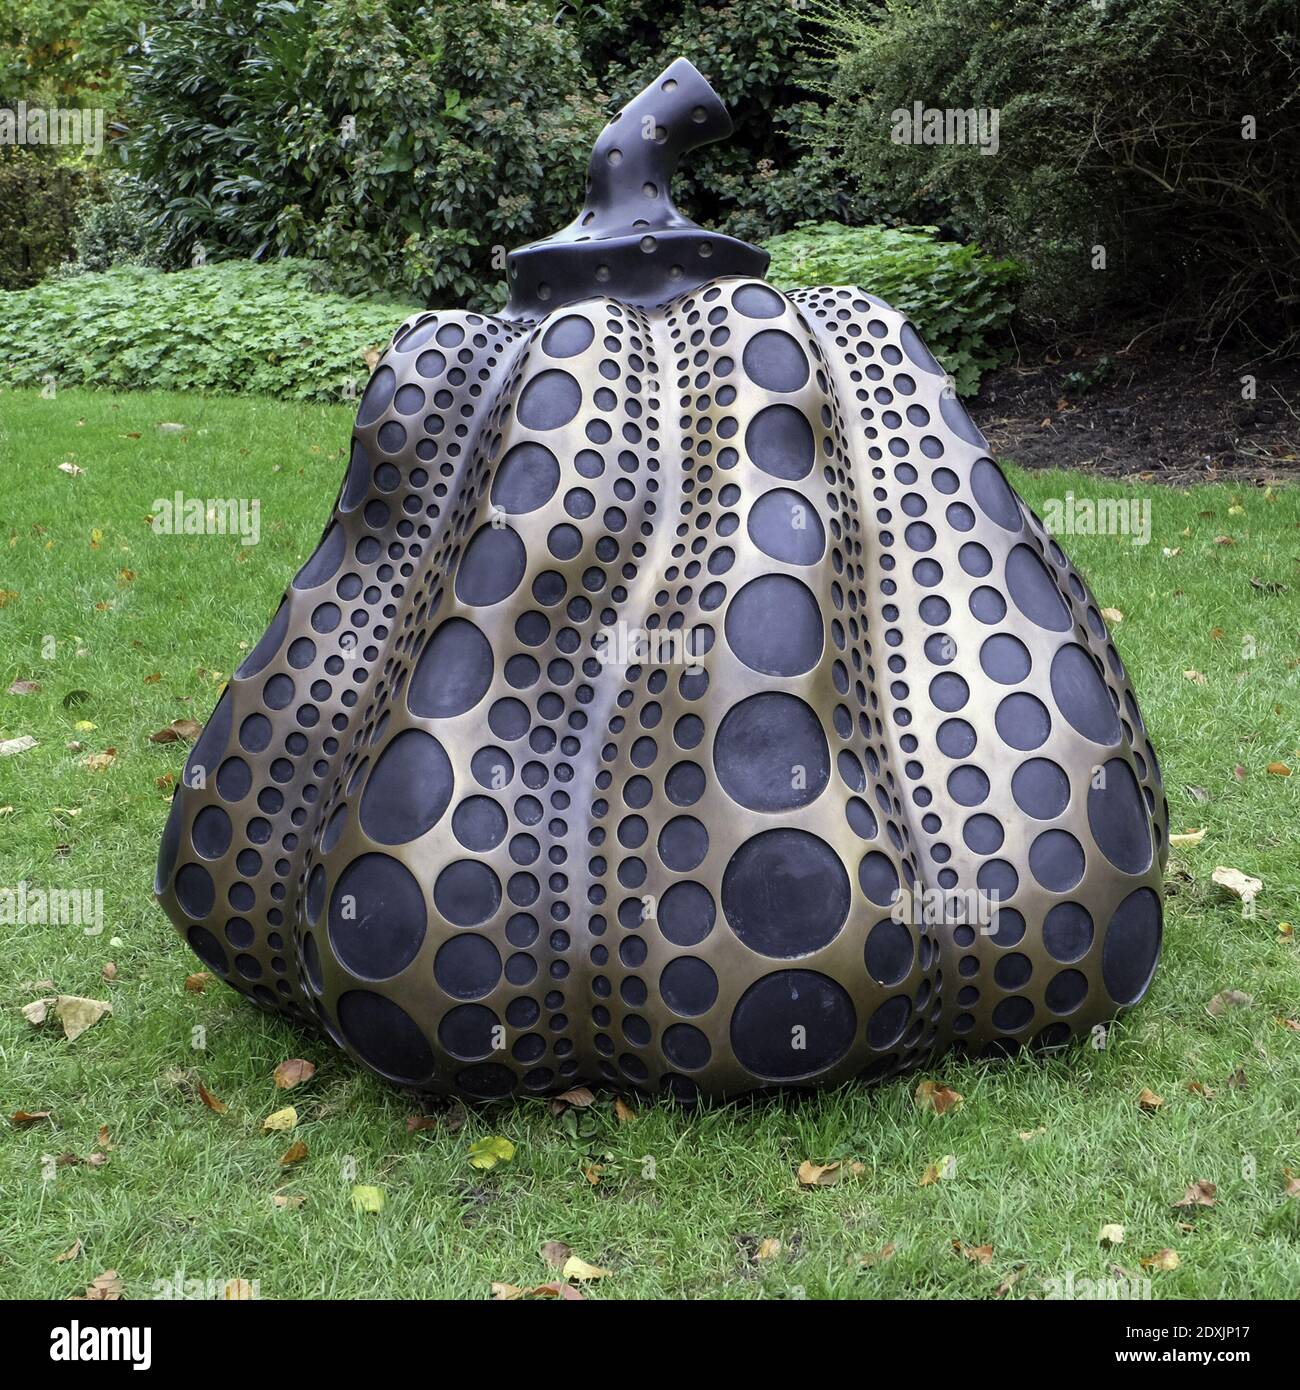 LONDON, UNITED KINGDOM - Oct 18, 2014: A large metal Pumpkin by Yayoi Kusama at the Frieze Art exhibition in Regents Park Stock Photo